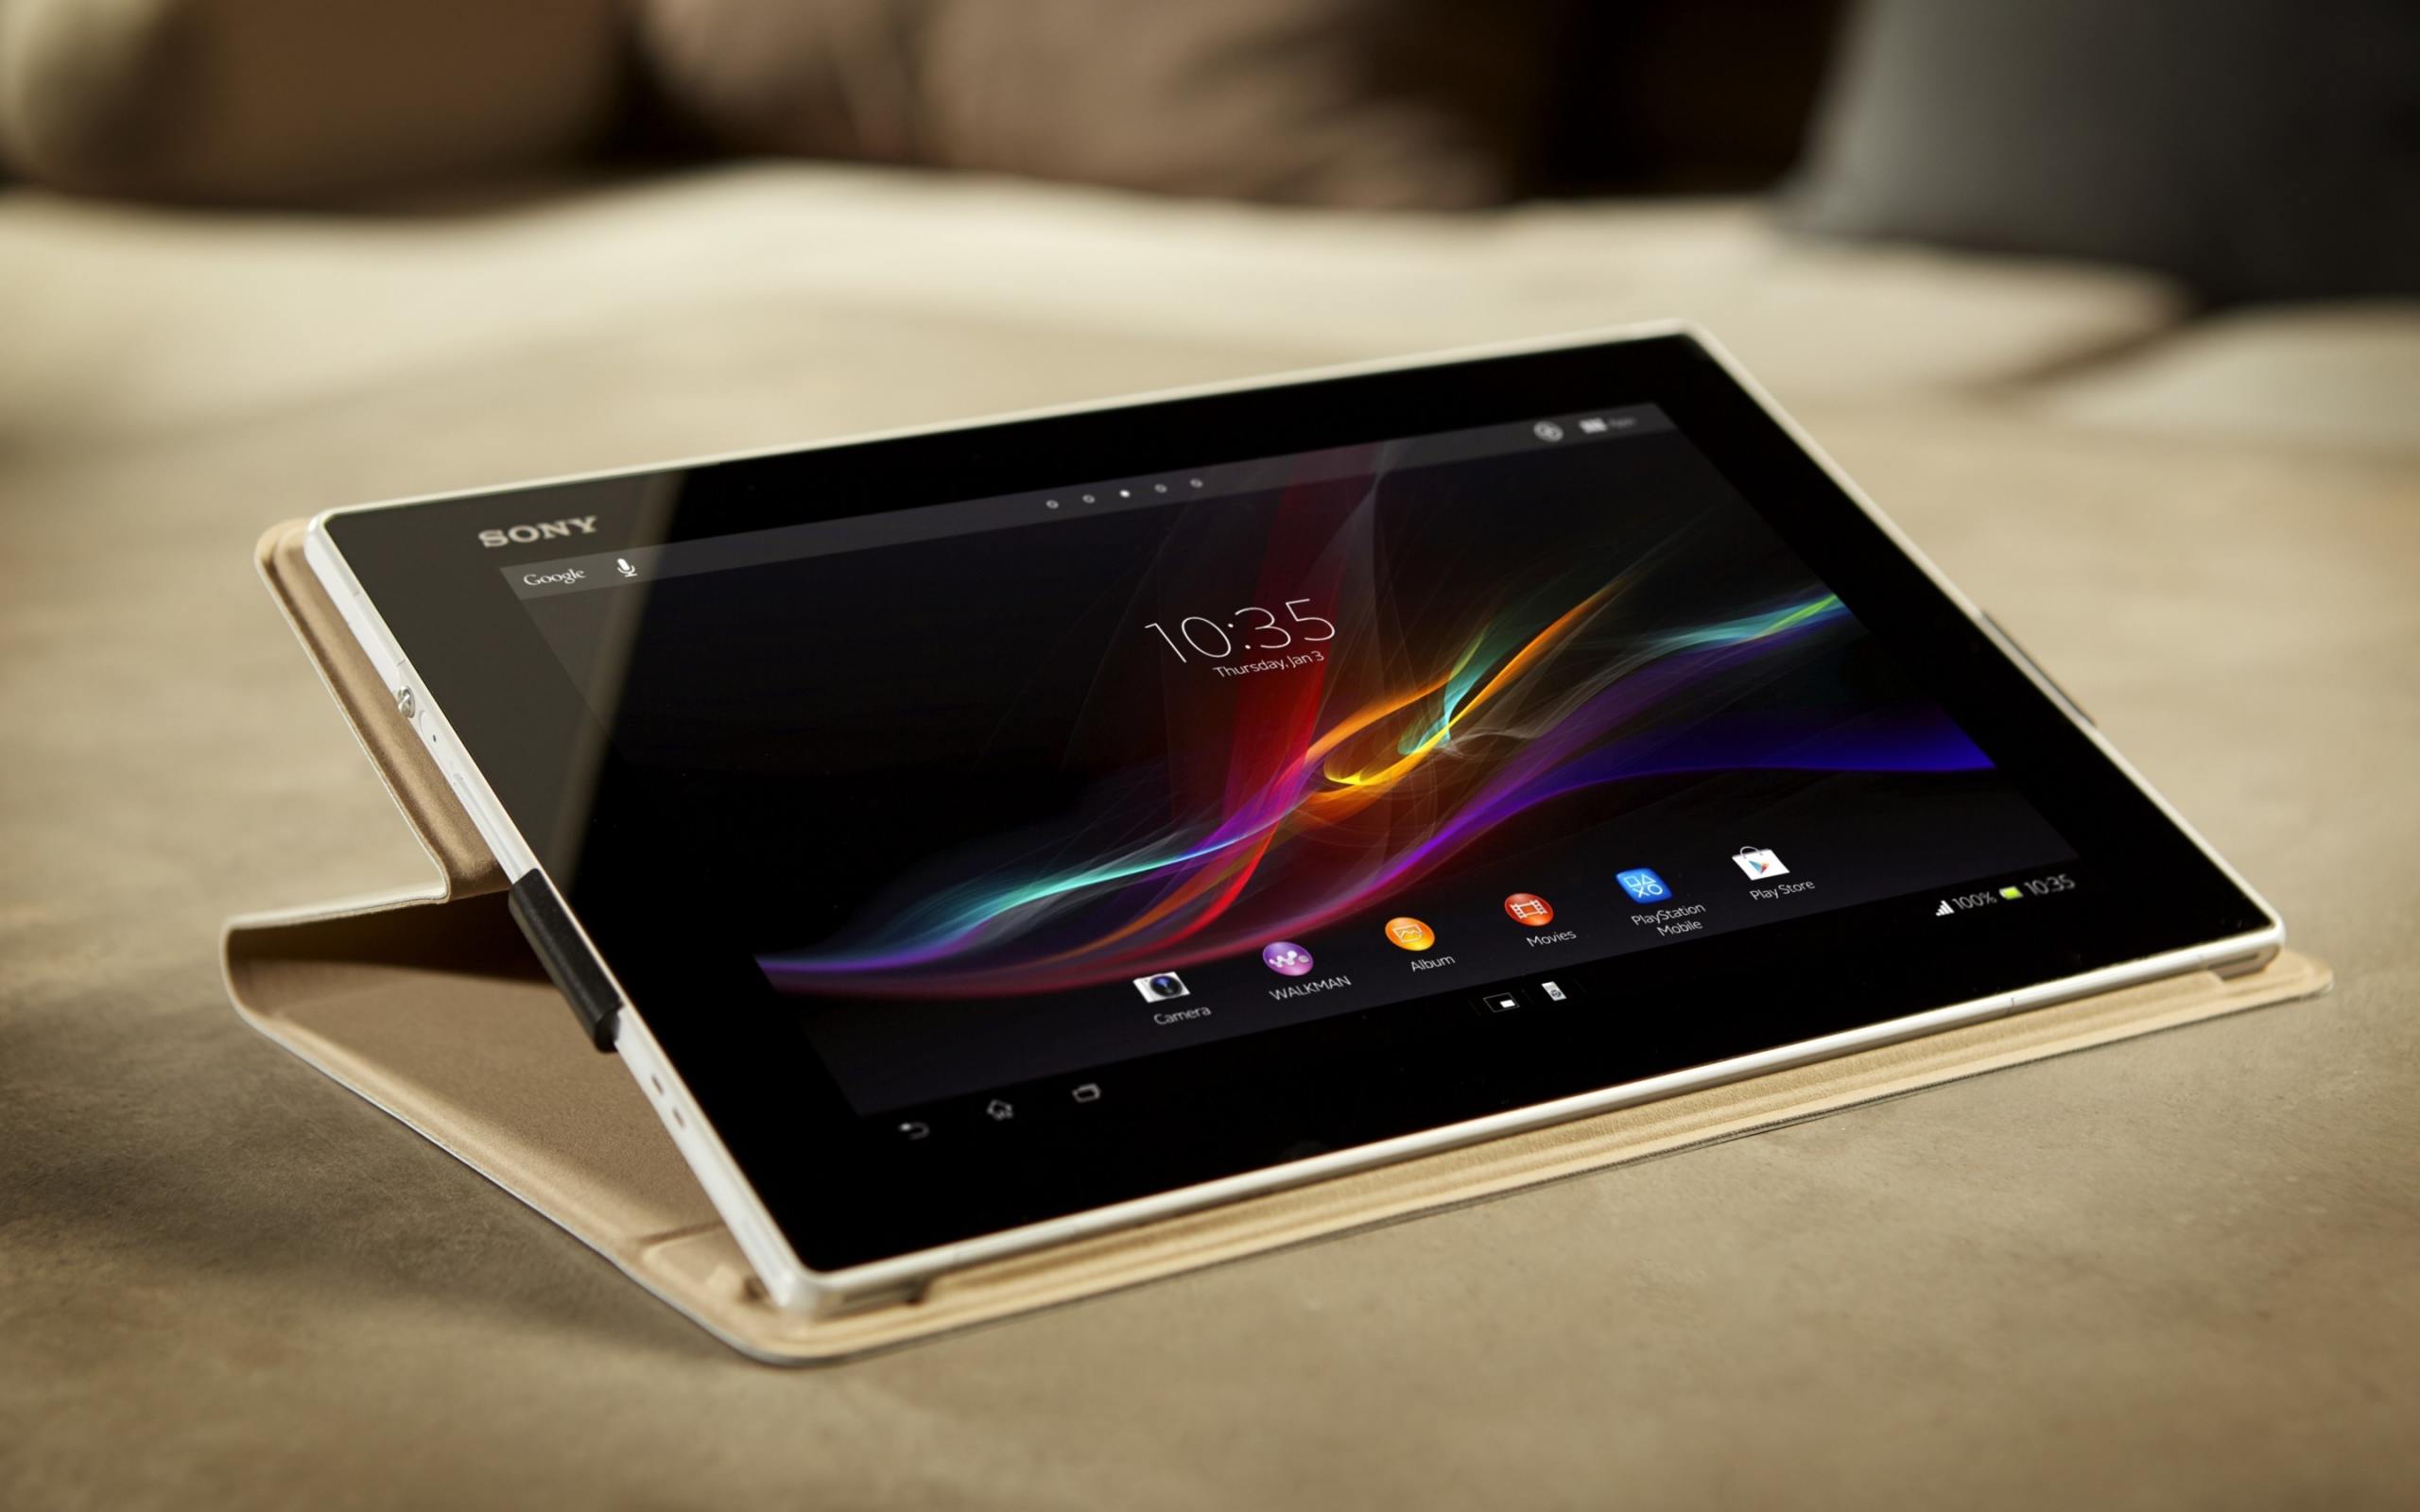 Sony Xperia Tablet Z for 2560 x 1600 widescreen resolution